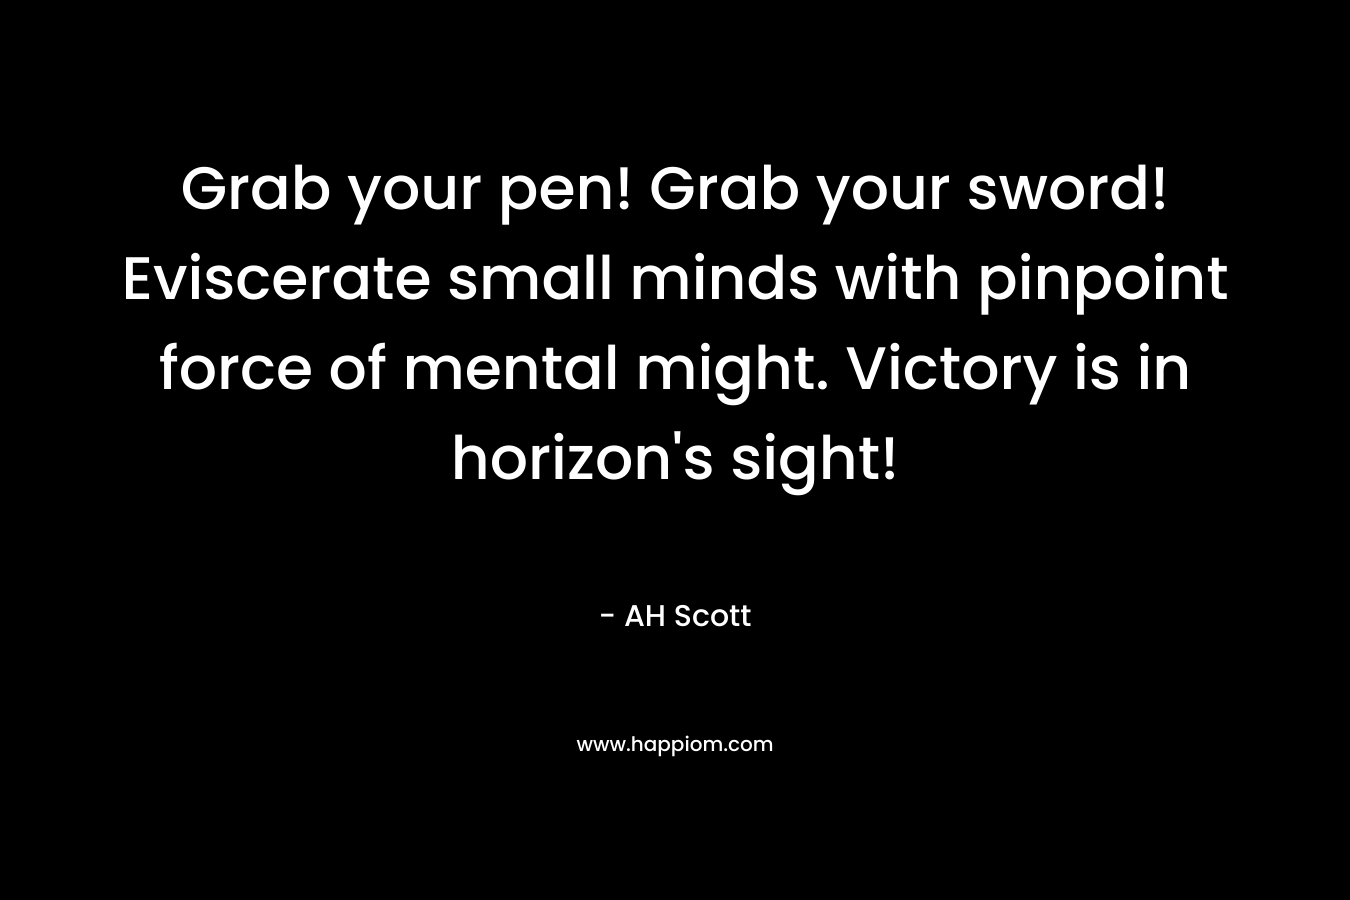 Grab your pen! Grab your sword! Eviscerate small minds with pinpoint force of mental might. Victory is in horizon's sight!